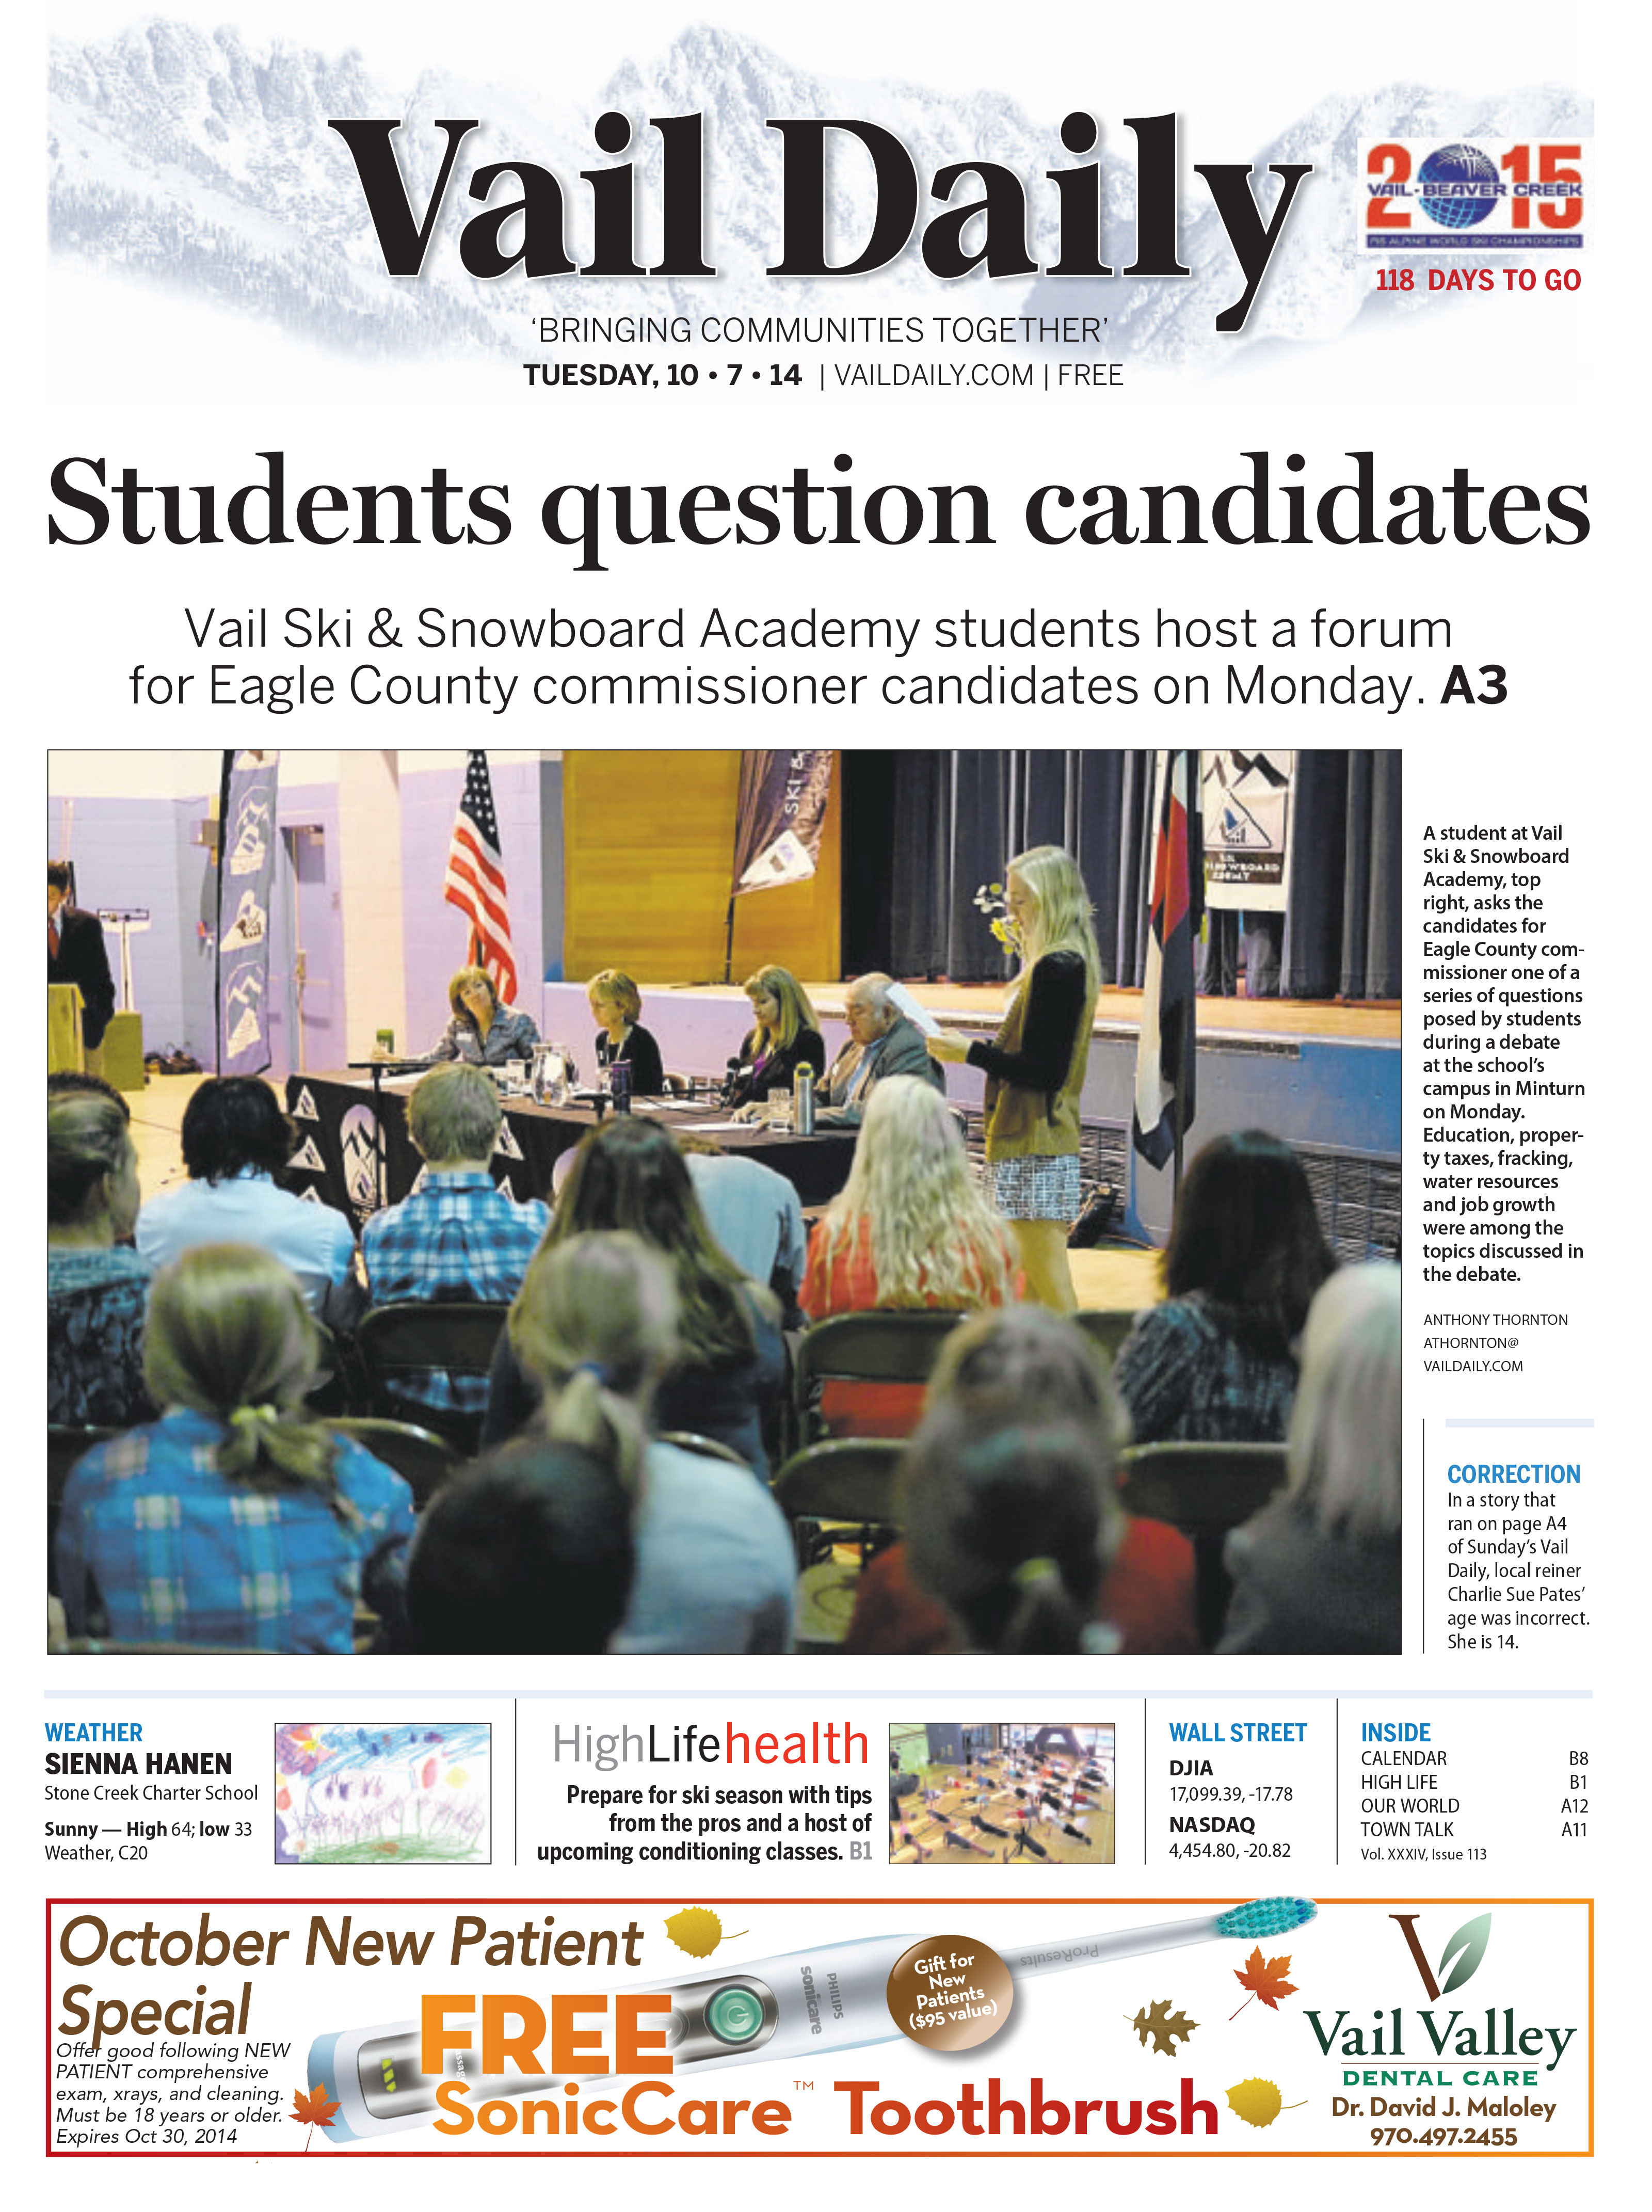 Vail-Daily-Cover-Story-Commissioner-Candidates-Face-Young-Audiemce-10-7-14-1